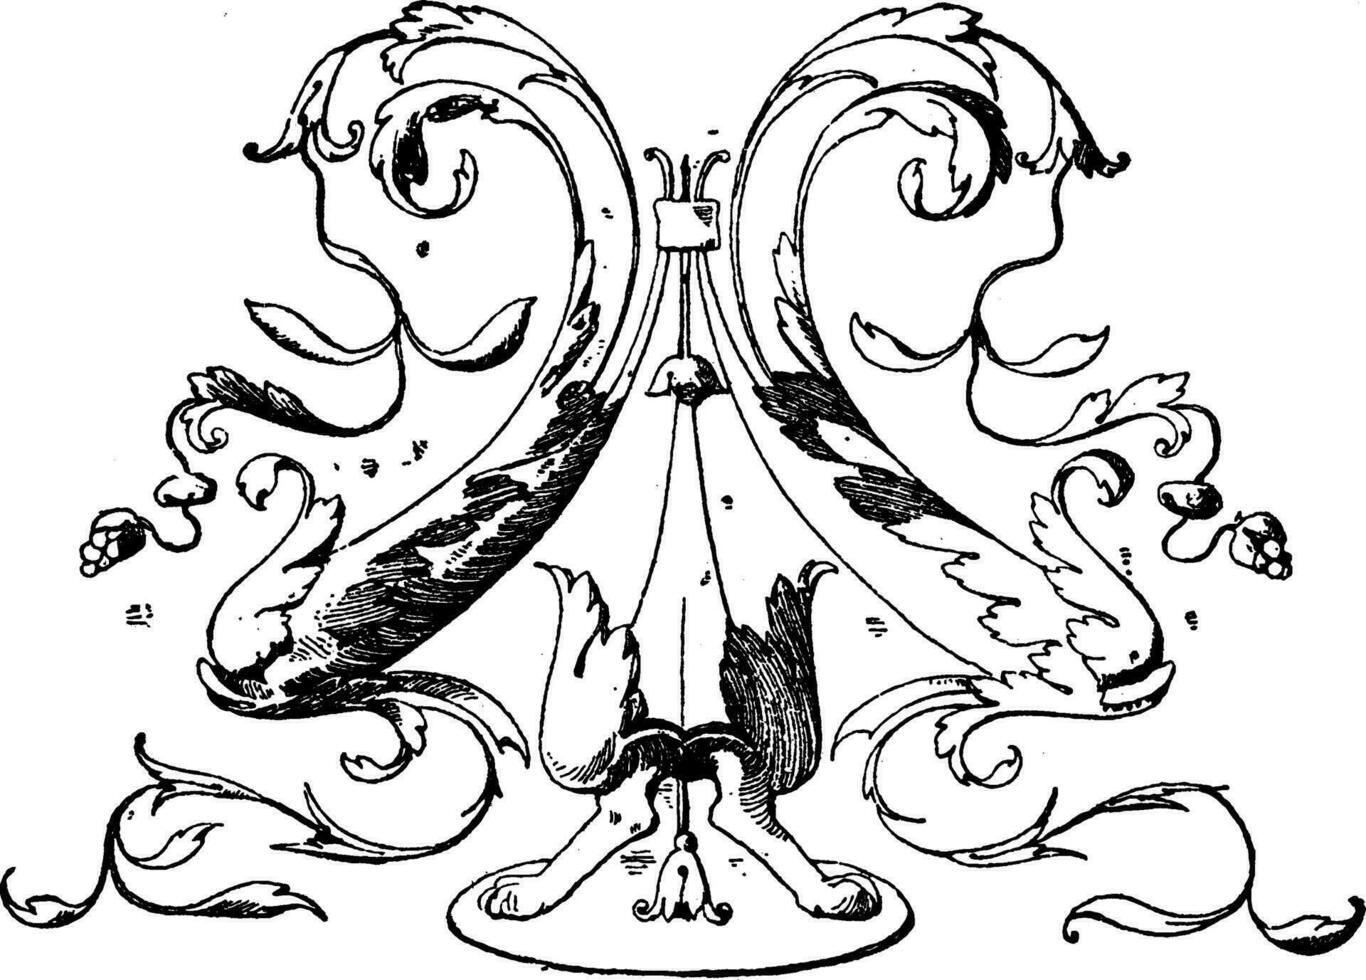 Dolphin Frieze is Designed by Bramate in 1504, vintage engraving. vector